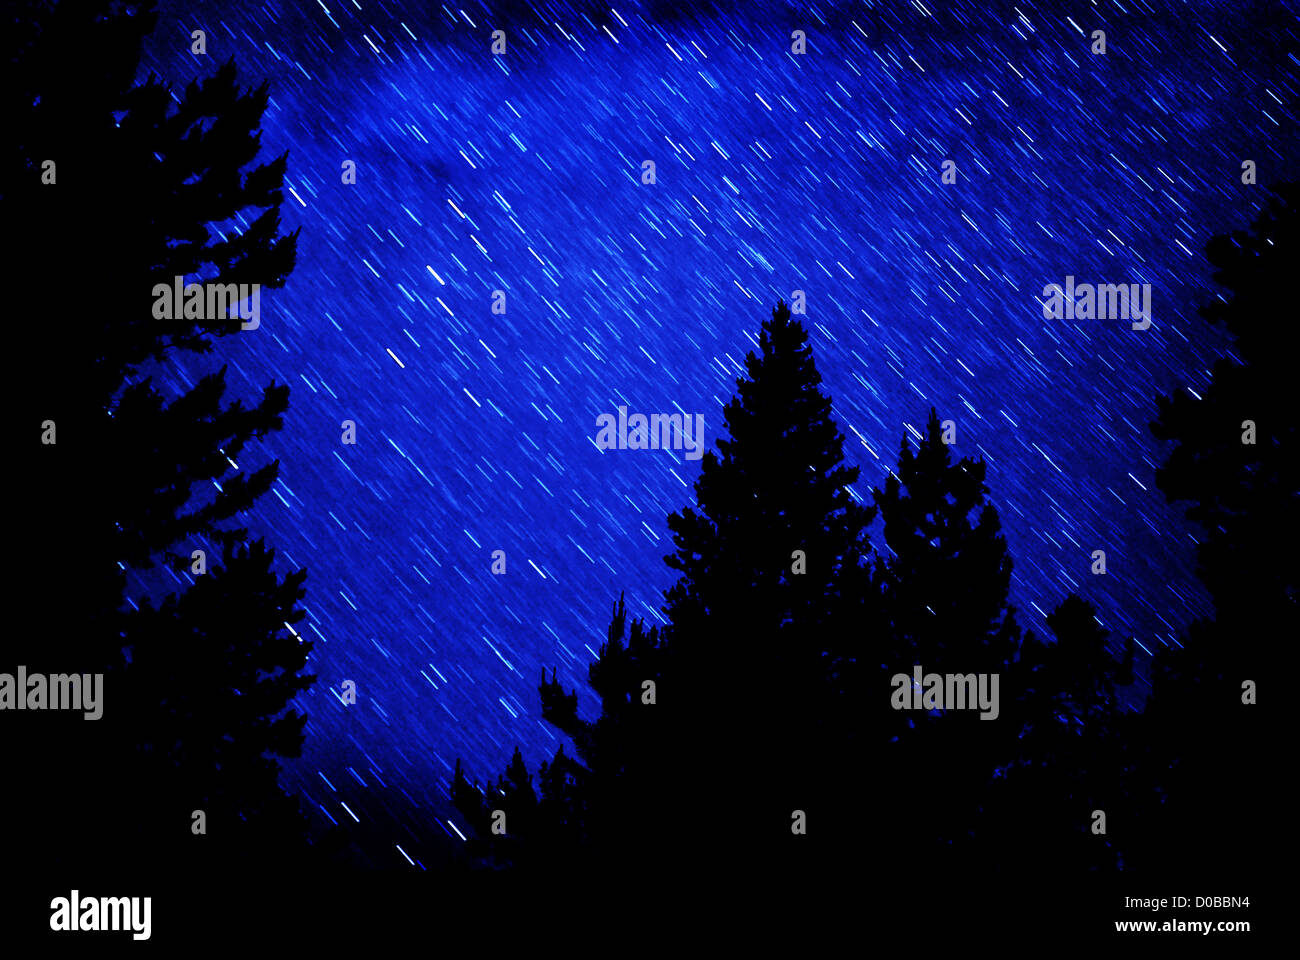 Star trails in blue night sky with pine trees silhouetted in front Stock Photo